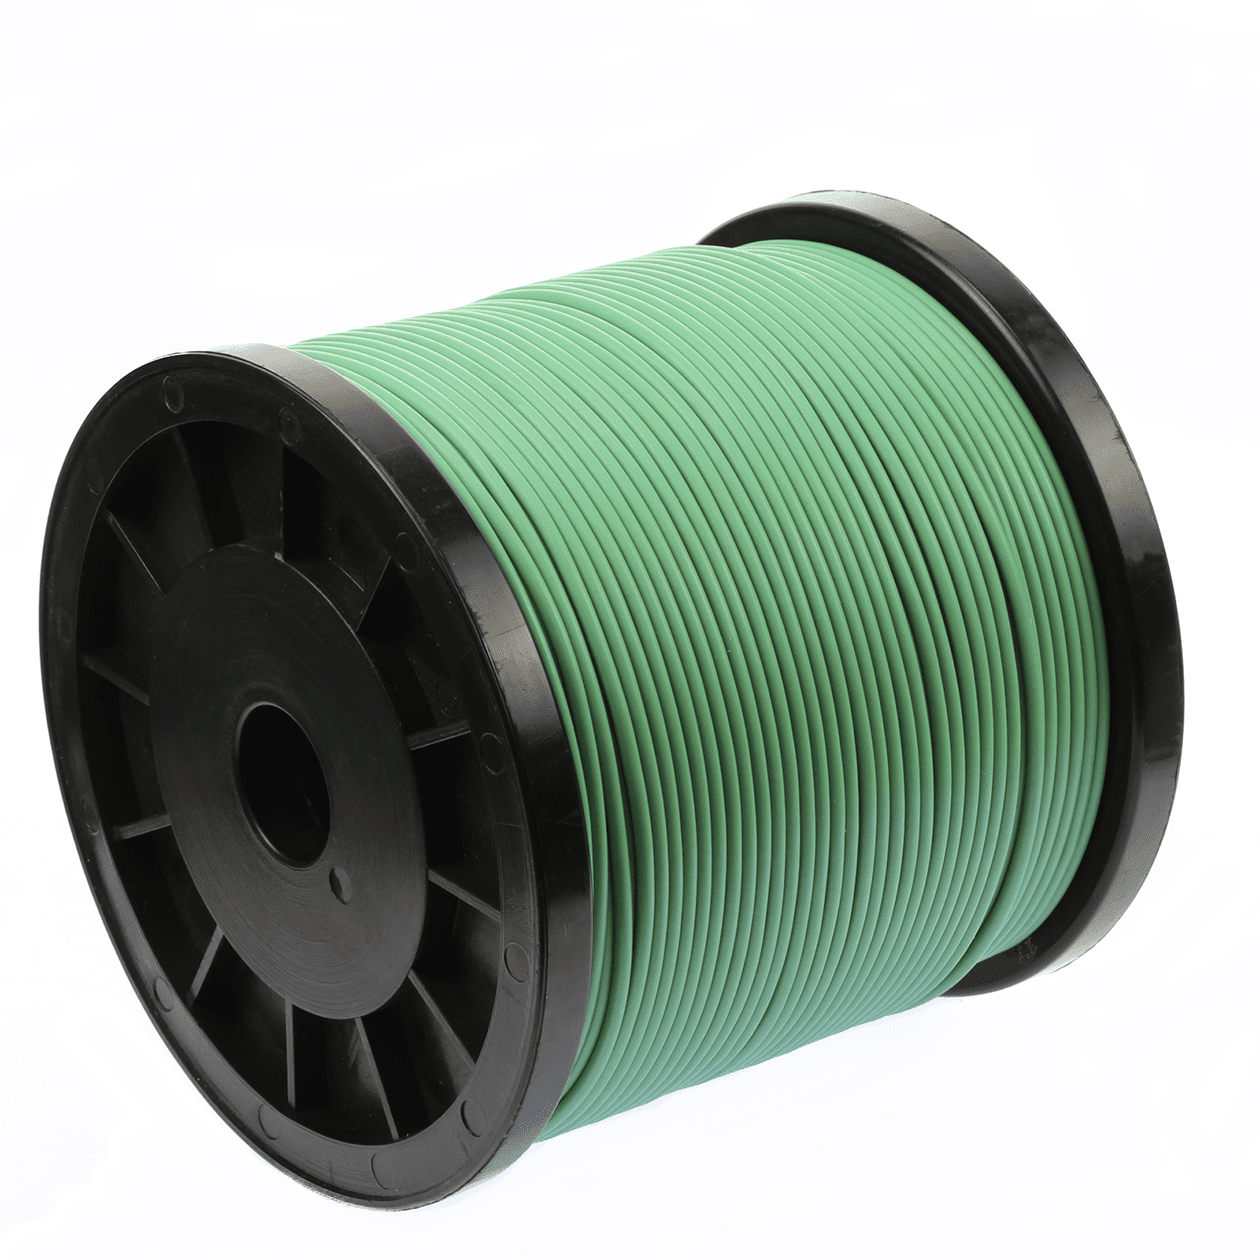 500FT PURPLEHIGH PERFORMANCE PRIMARY WIRE 22 GAUGE WITH SPOOL MADE IN USA 